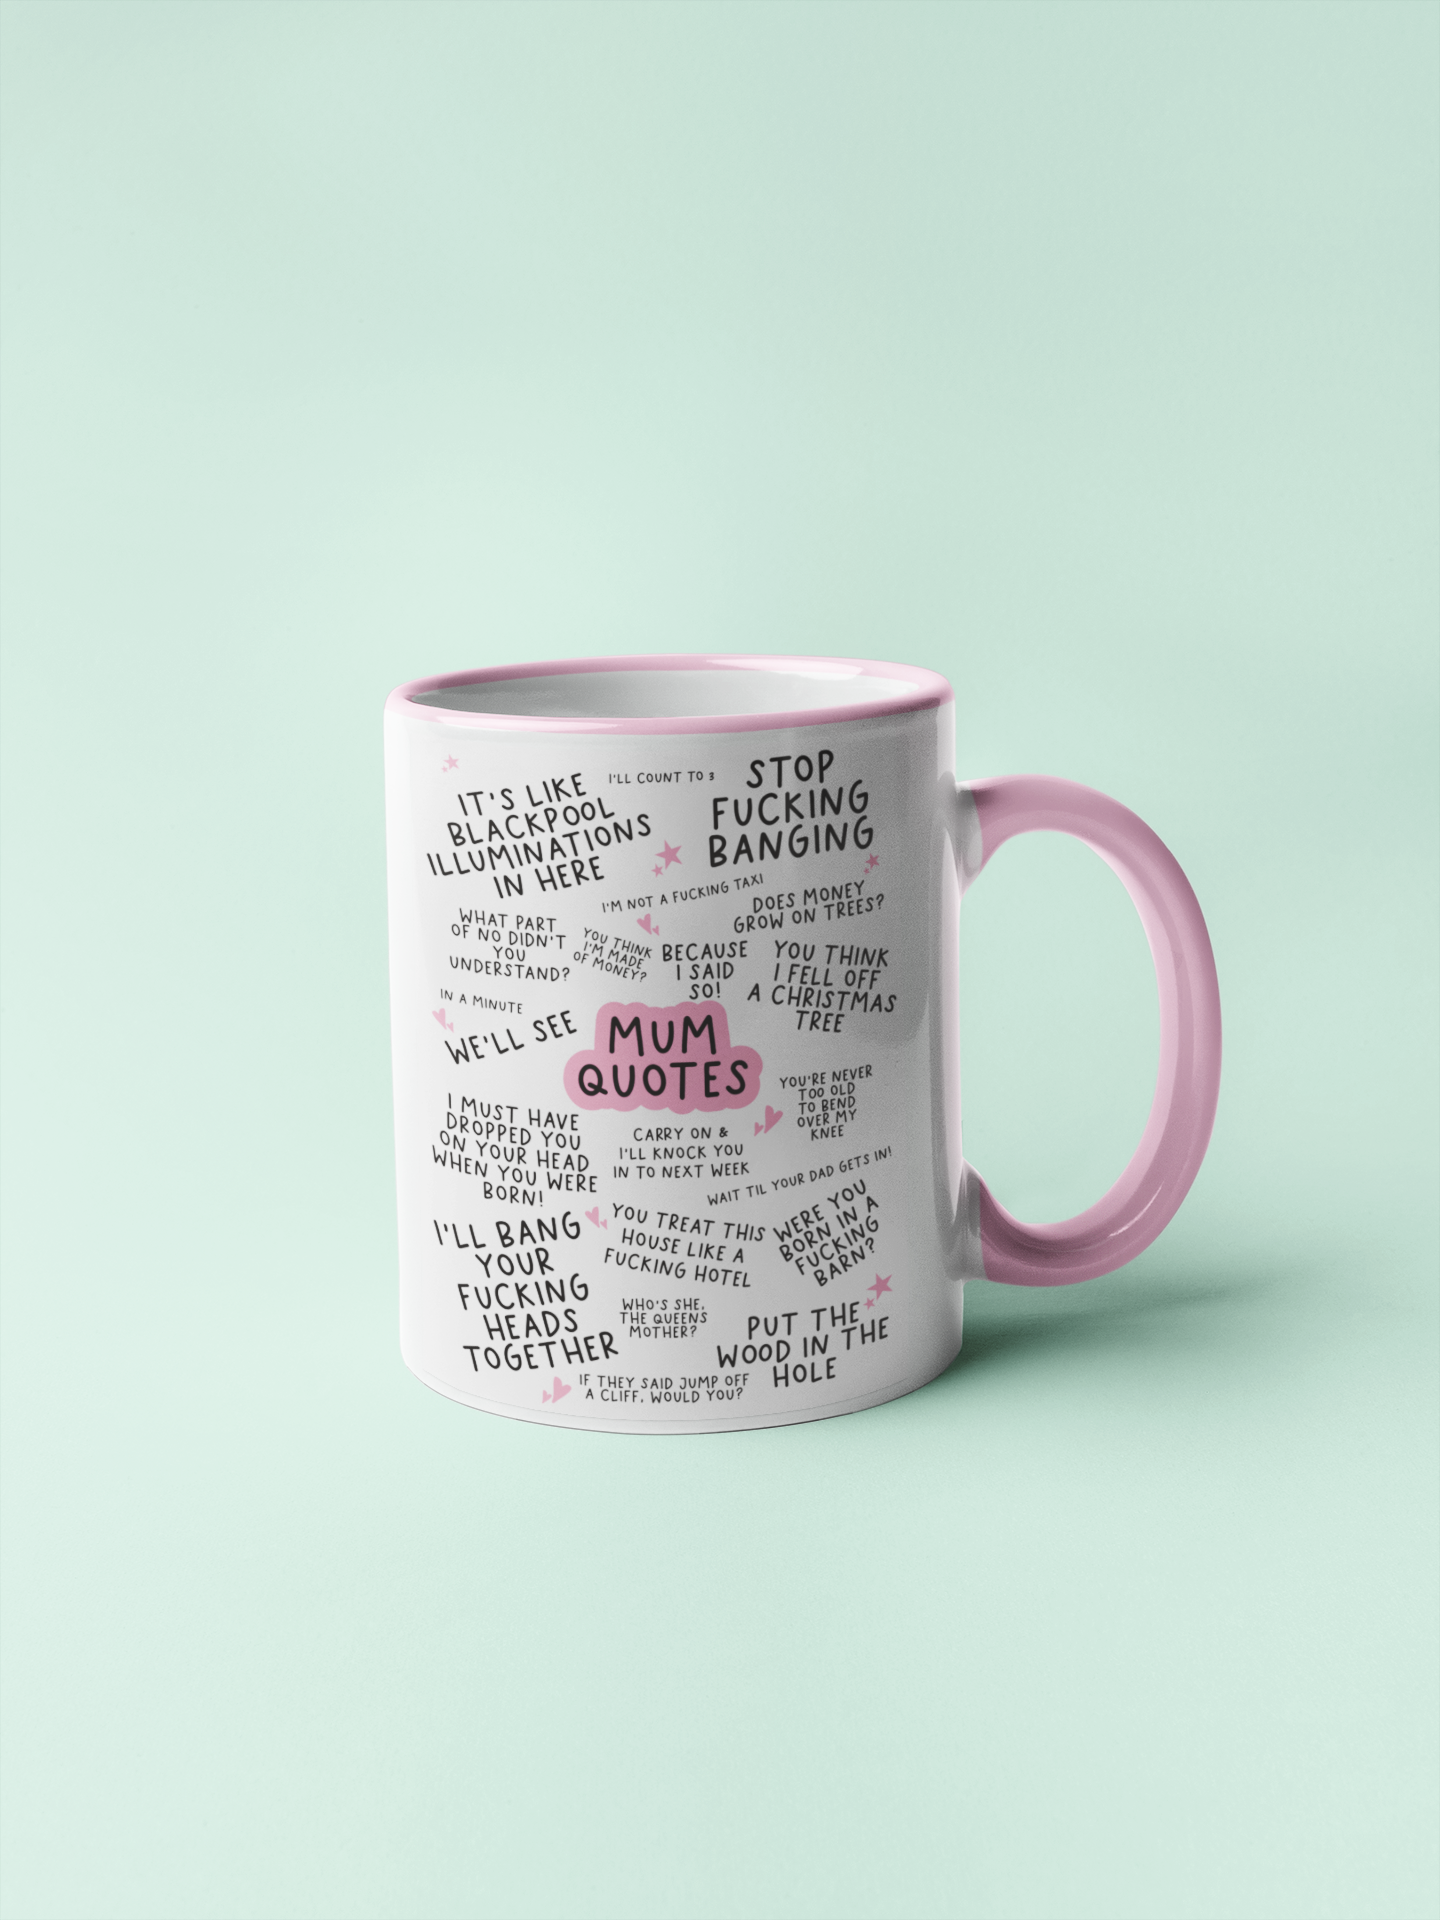 White ceramic mug featuring famous mum quotes which include 'stop fucking banging, it's like blackpool illuminations in here & i'll bang your fucking heads together'.